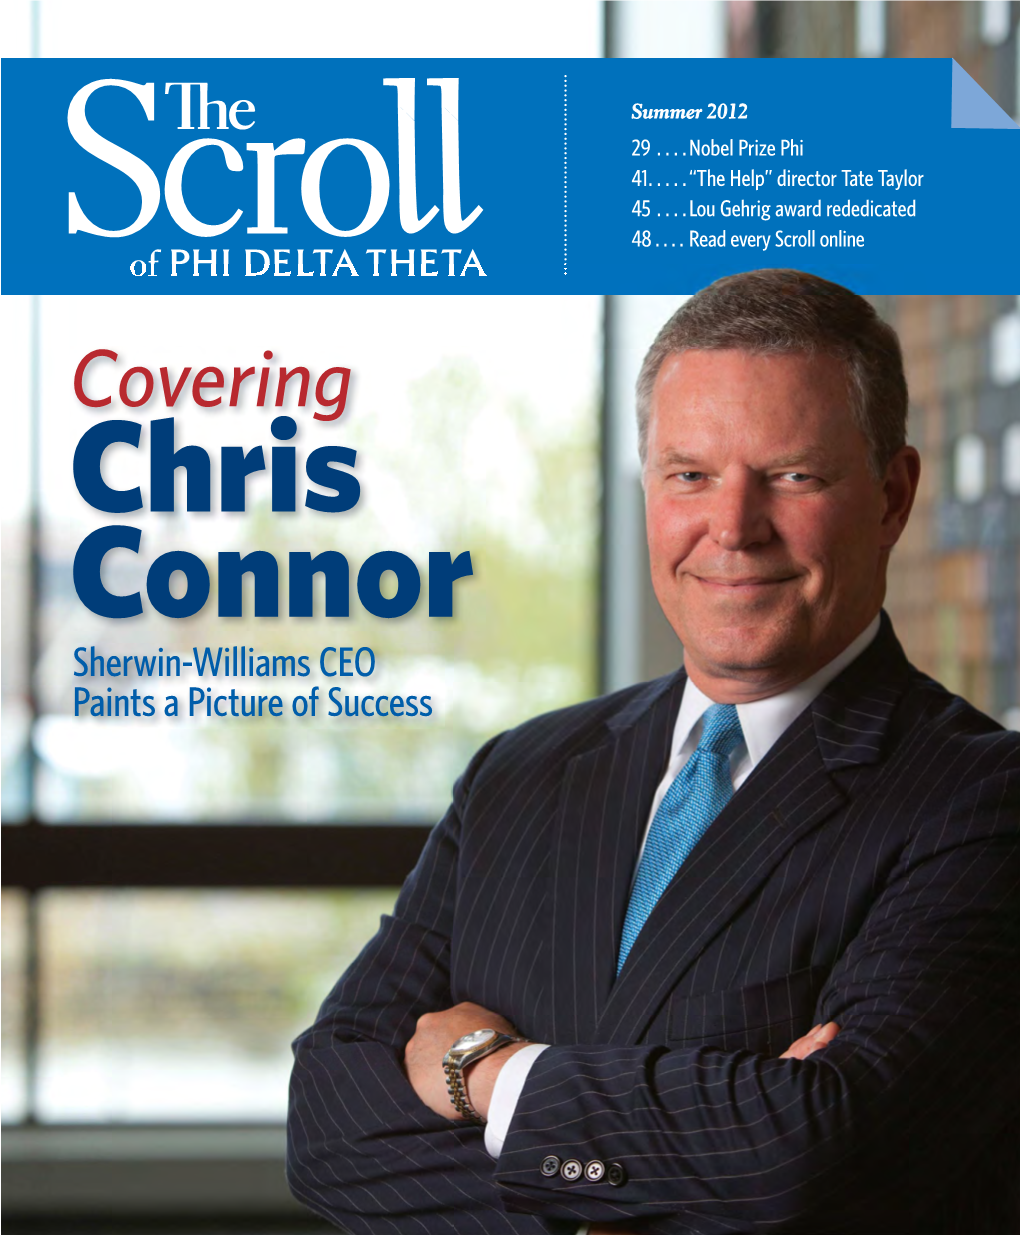 Covering Chris Connor Sherwin-Williams CEO Paints a Picture of Success Contents the Scroll Summer 2012 Volume CXXXV, Number 1